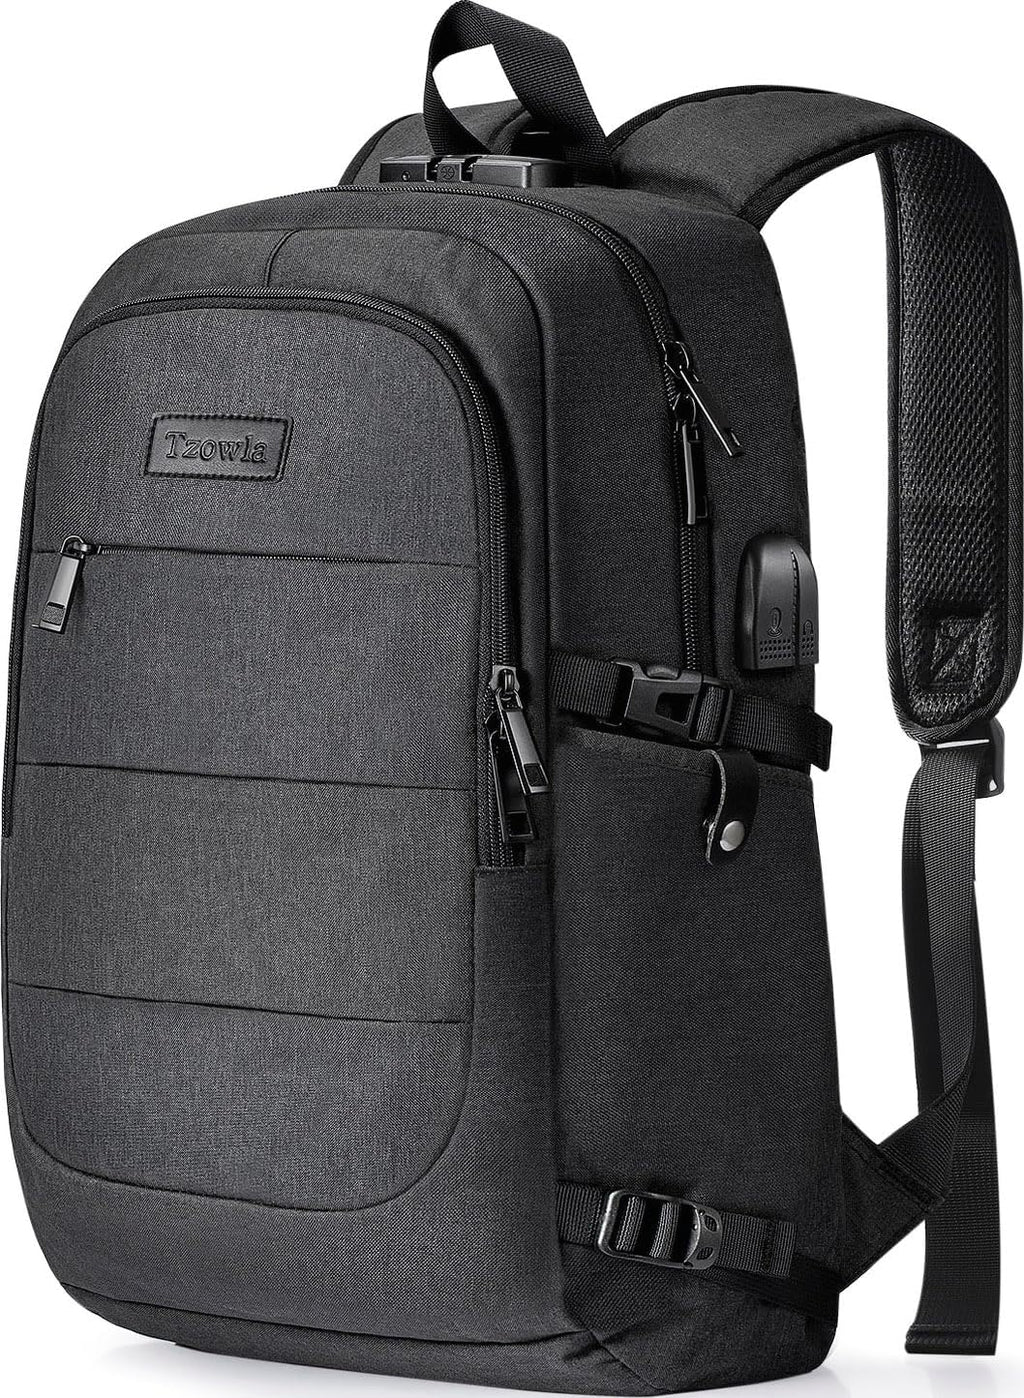 Water Resistant Anti-Theft Travel Laptop Backpack with USB Charging Port